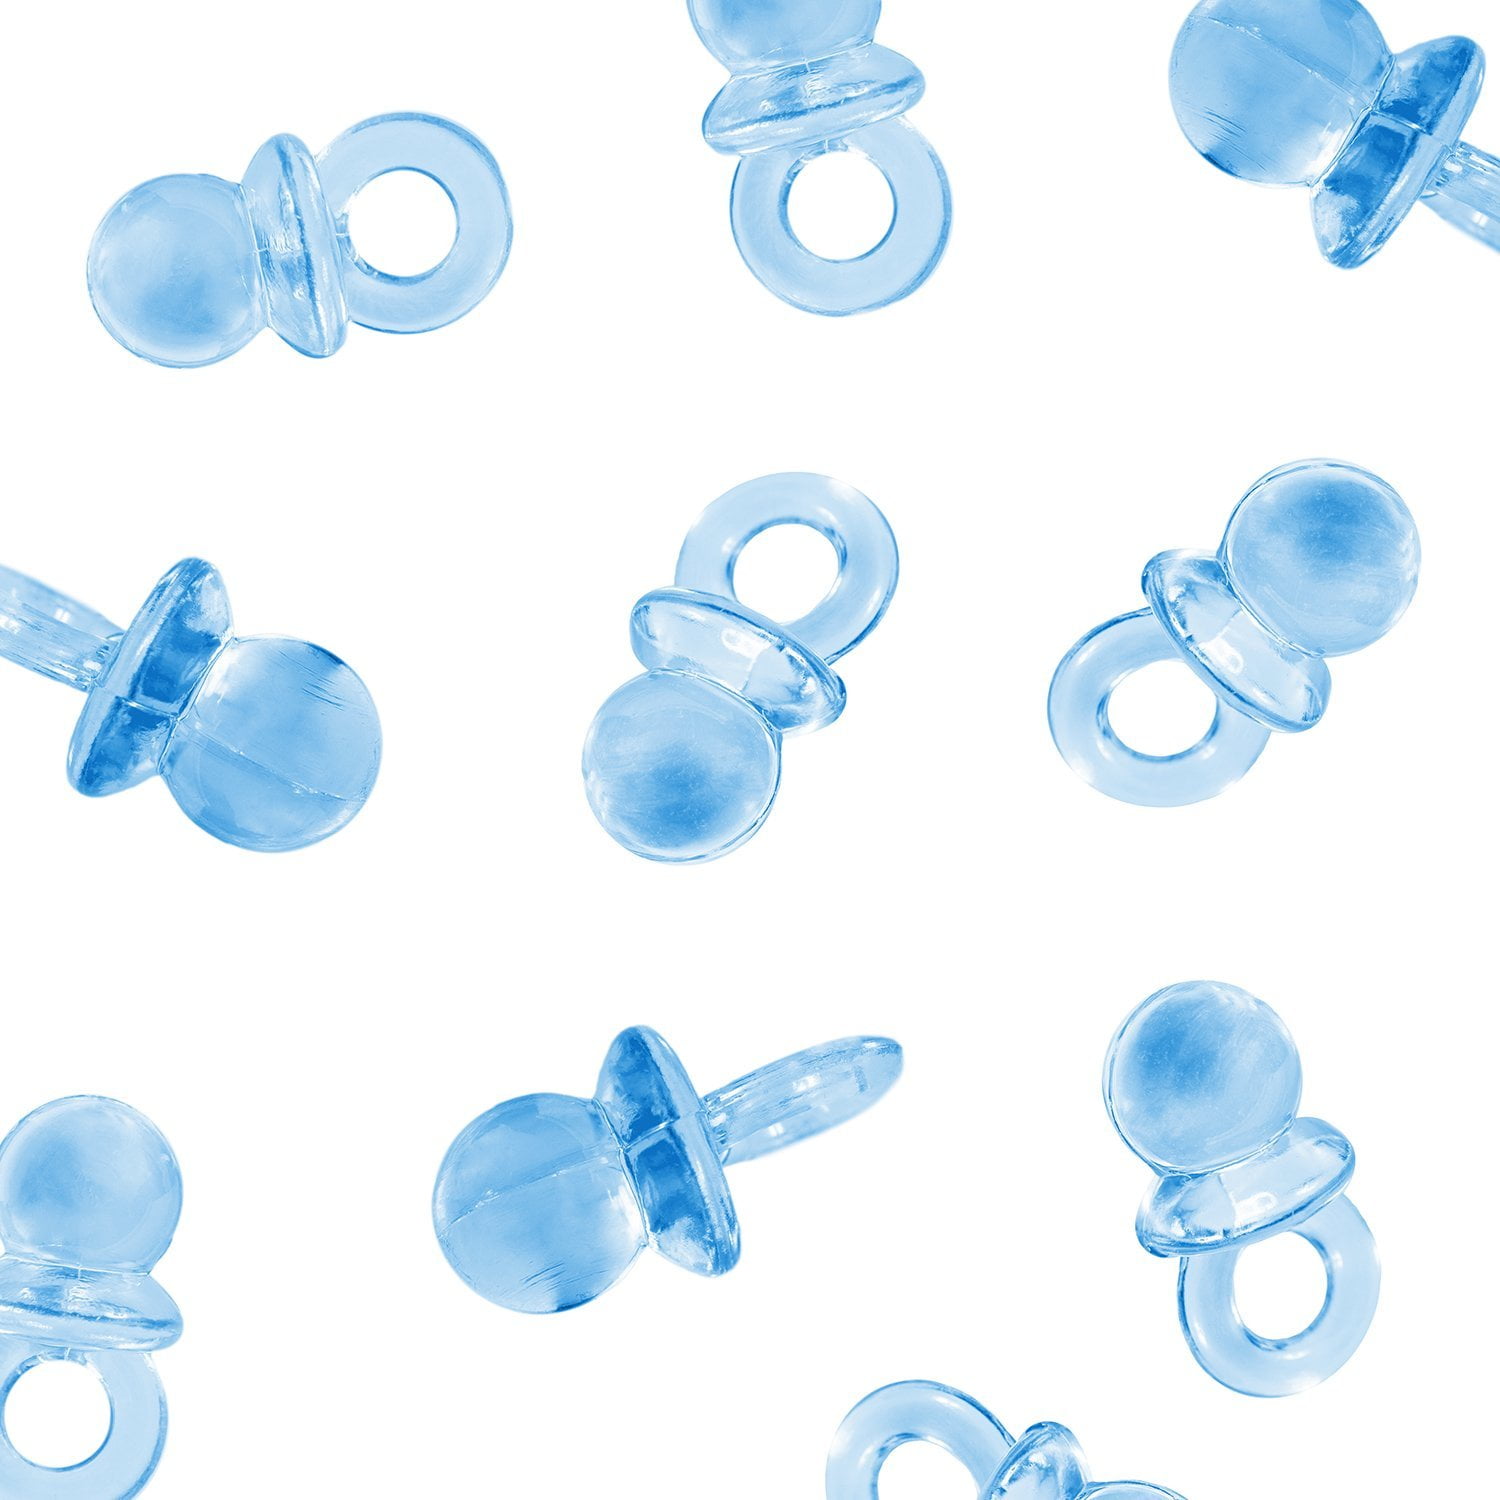 144 Baby shower PACIFIERS BLUE PLASTIC 3/4" SCATTER DECOR DIY CRAFT GIFTS CUTE 